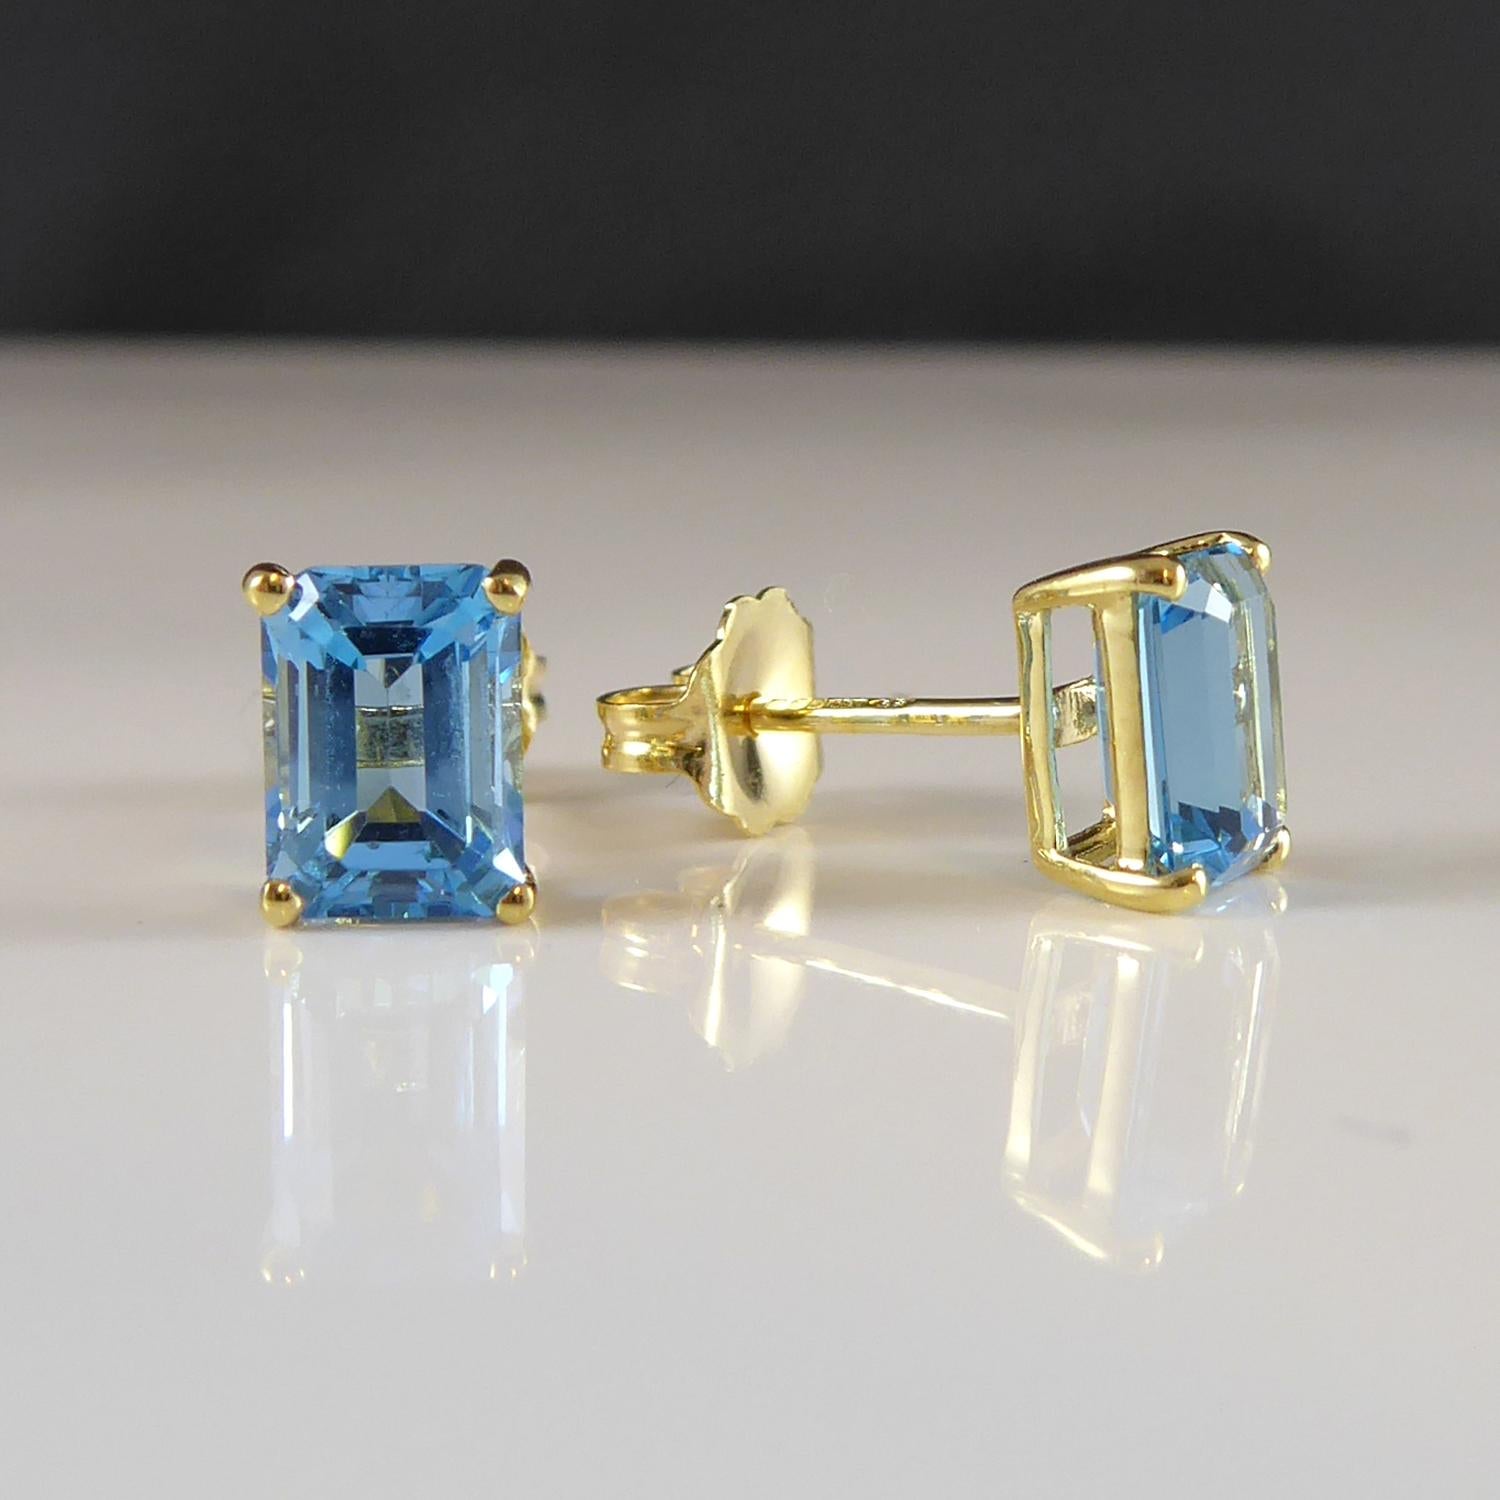 A simple and elegant paire of pre-owned blue topaz earrings.  Each earring is features an emerald cut blue topaz of vibrant colour and measuring approx. 7.00mm x 5.00mm.  Set in a four claw yellow mount with post and butterfly fittings for pierced